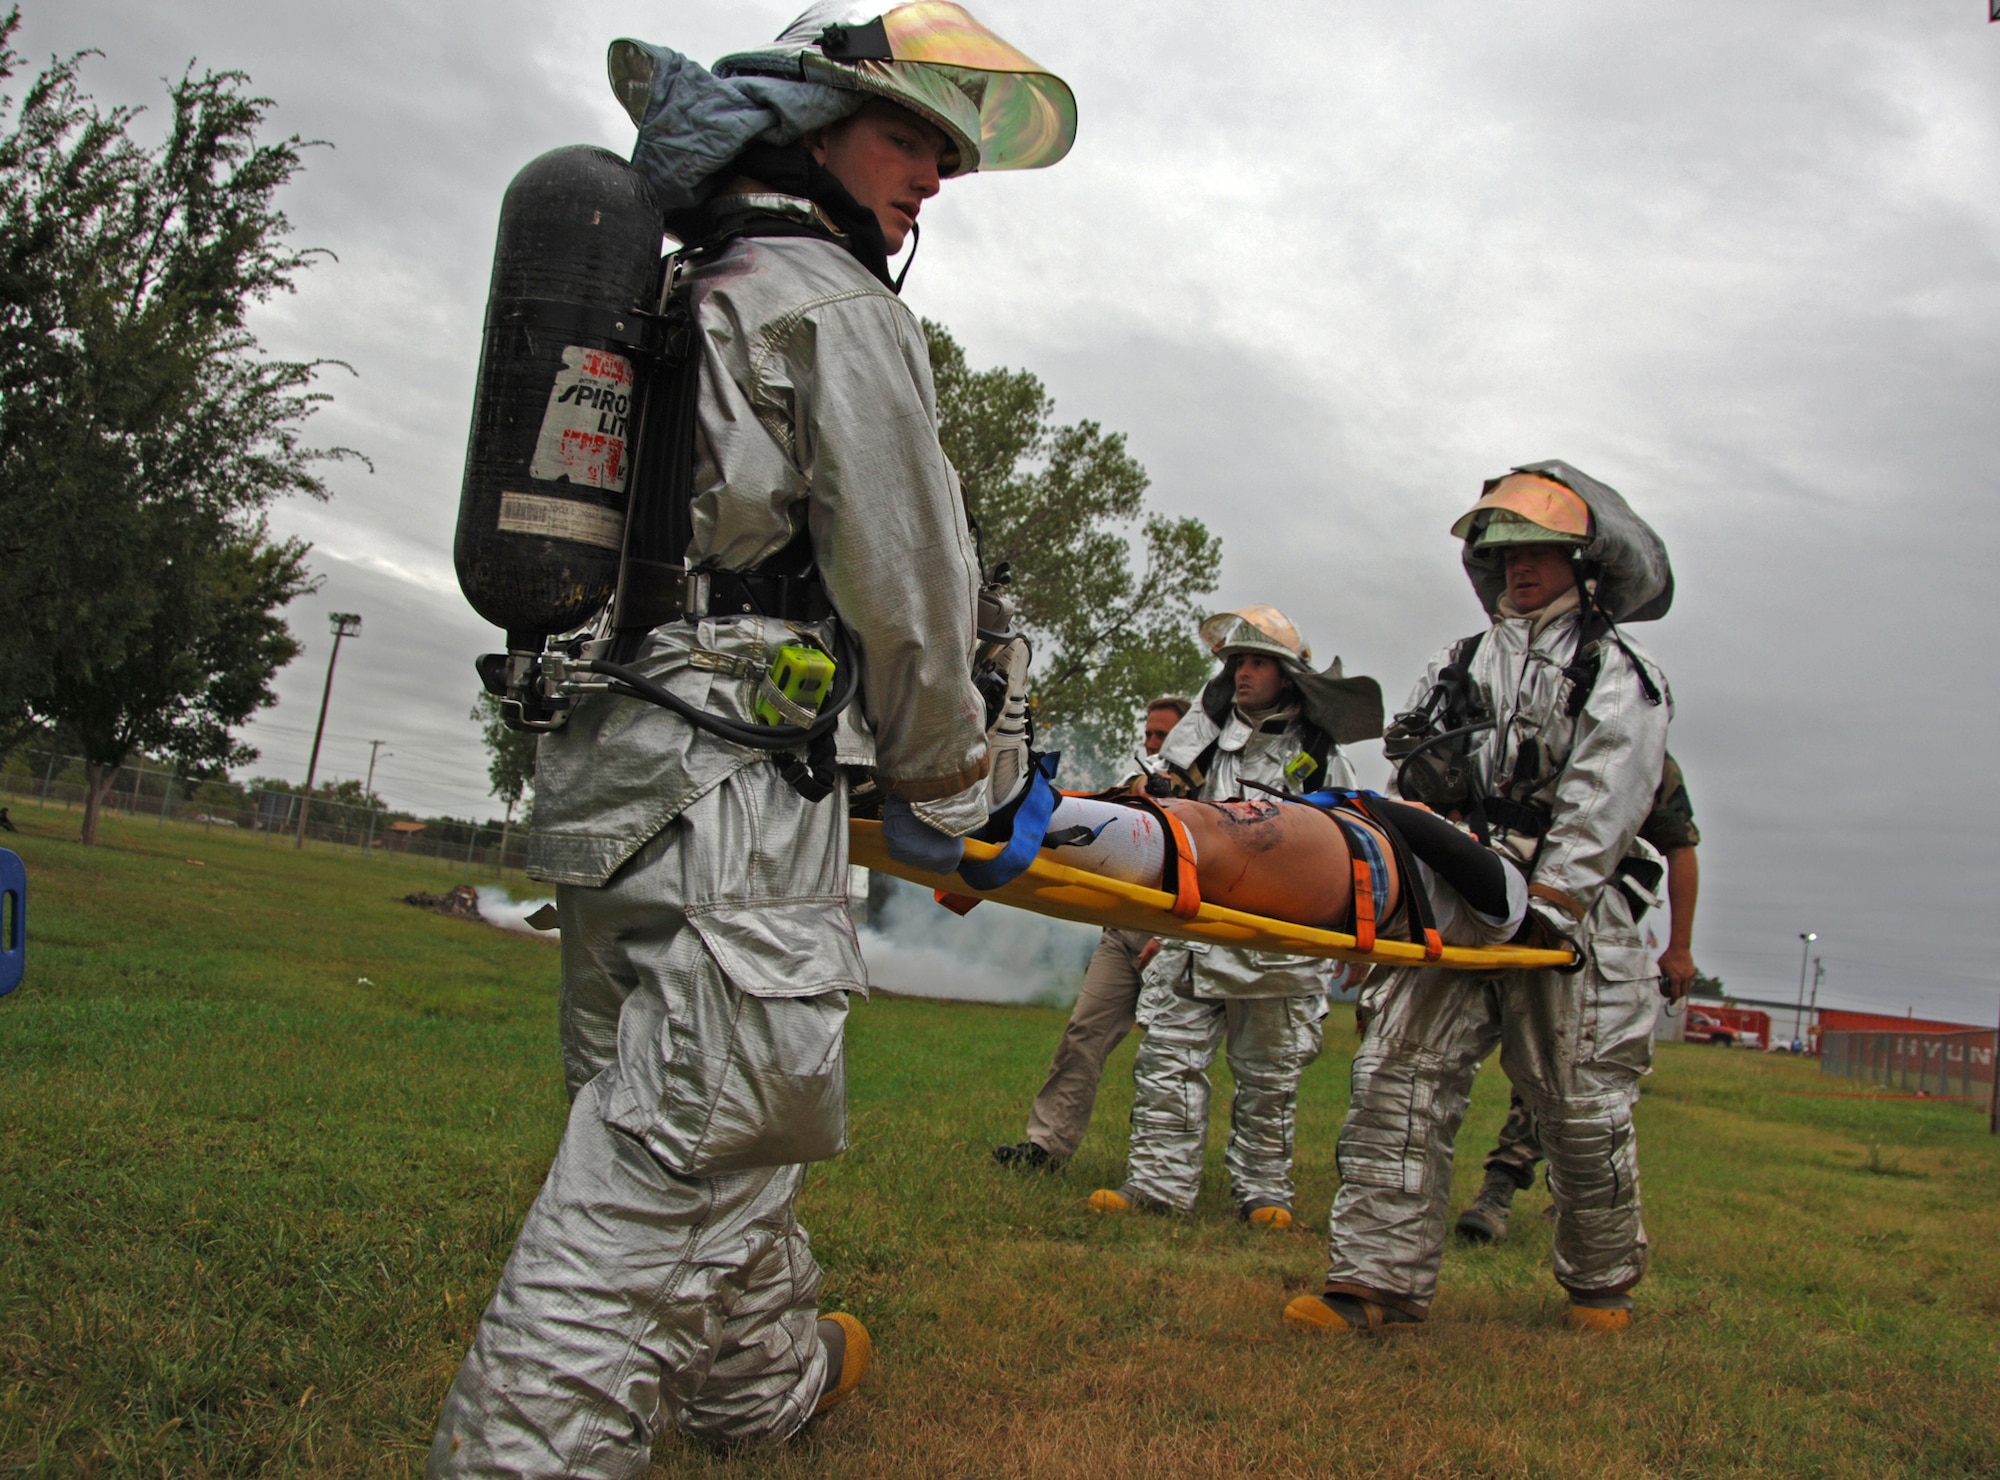 Rescue Airmen assigned to the 22nd Air Refueling Wing evacuate a simulated aircraft crash victim during a major accident response exercise just outside McConnell Air Force Base, Kan., on Sept 3. Several Airmen from the 931st Air Refueling Group worked with the 22nd in support of the exercise.